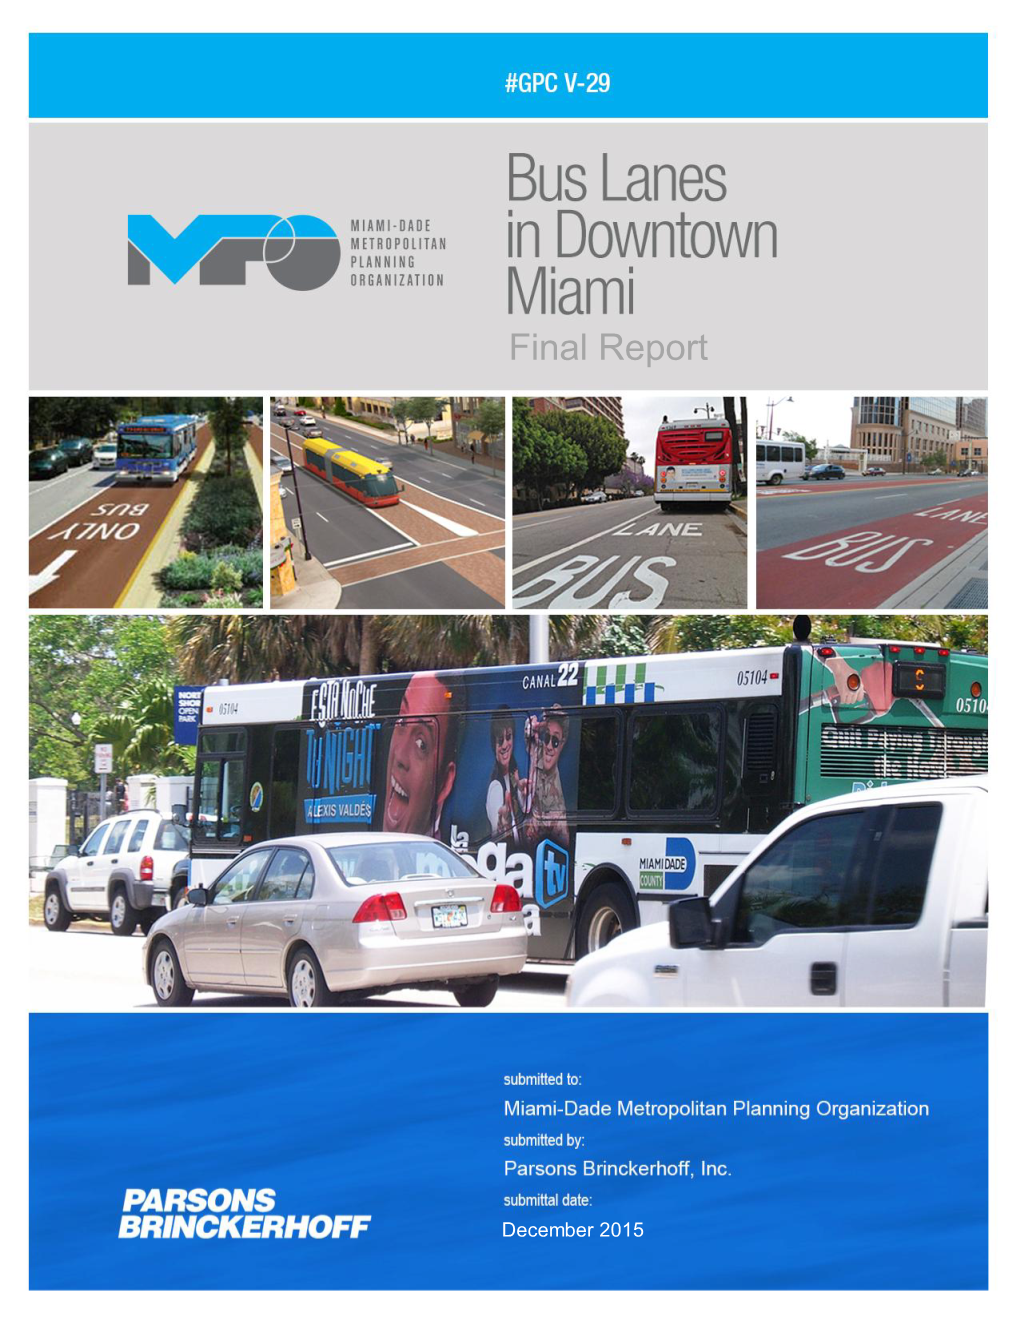 Bus Lanes in Downtown Miami Final Report, 12/2015